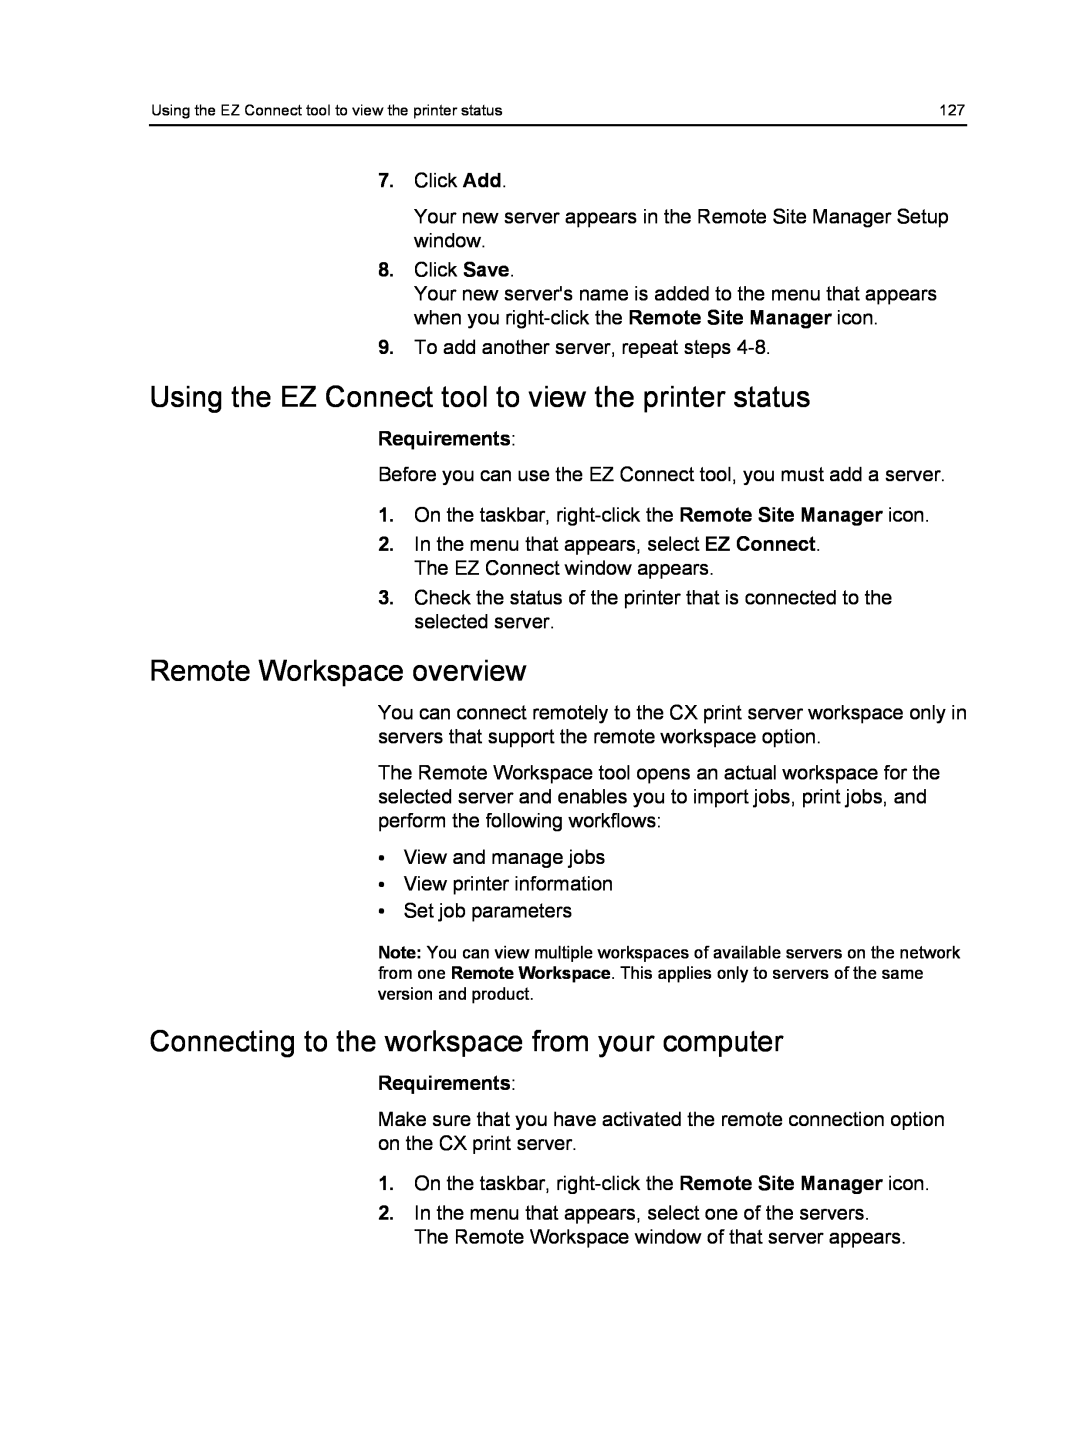 Xerox 550, 560 manual Remote Workspace overview, Connecting to the workspace from your computer, Requirements 